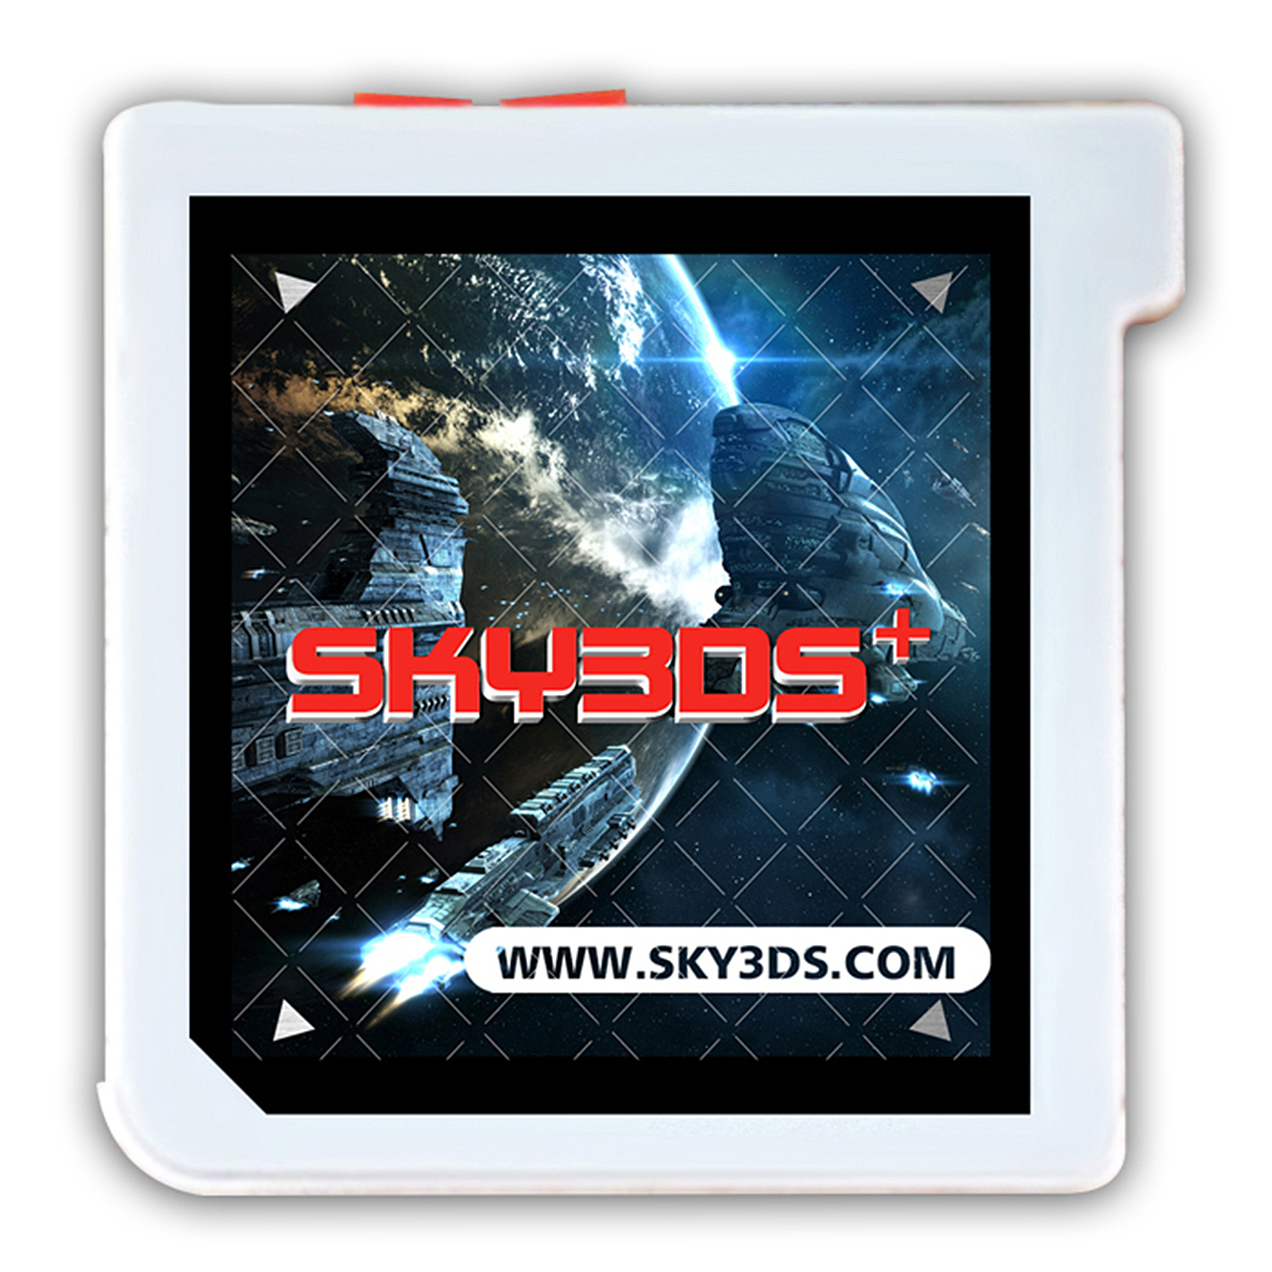 Official Review Sky3ds Hardware Gbatemp Net The Independent Video Game Community